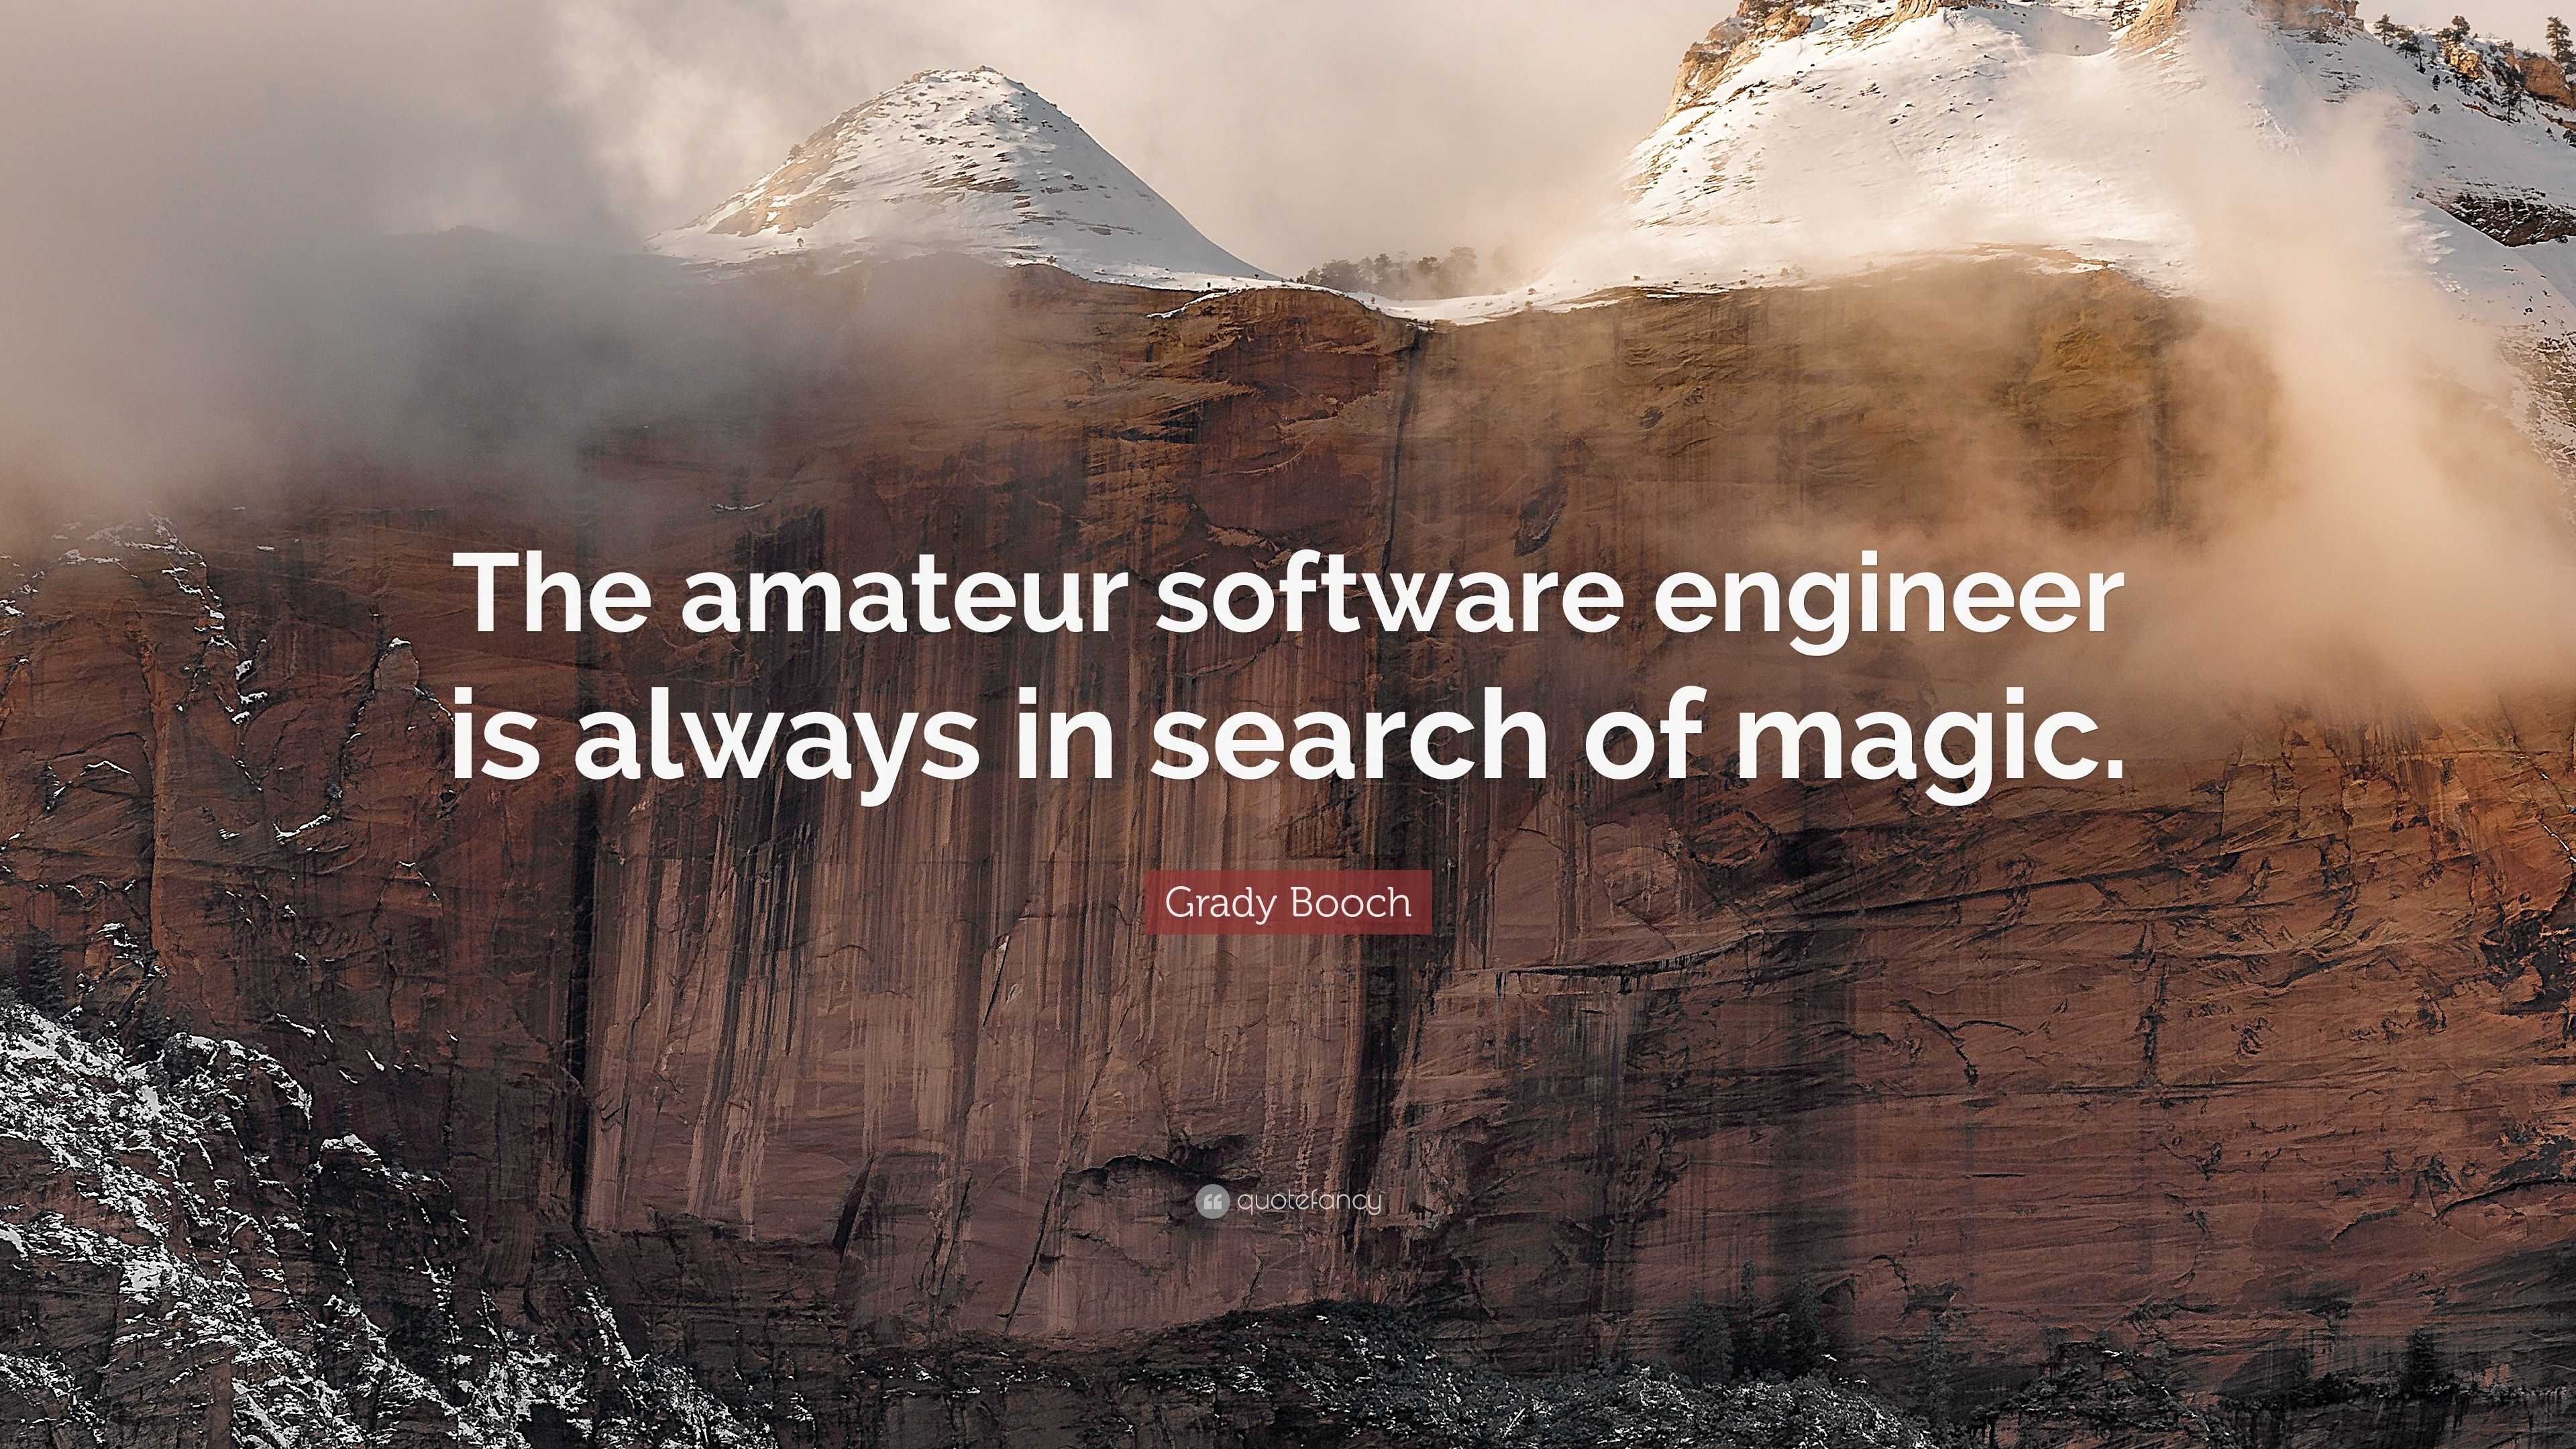 Grady Booch Quote “The amateur software engineer is